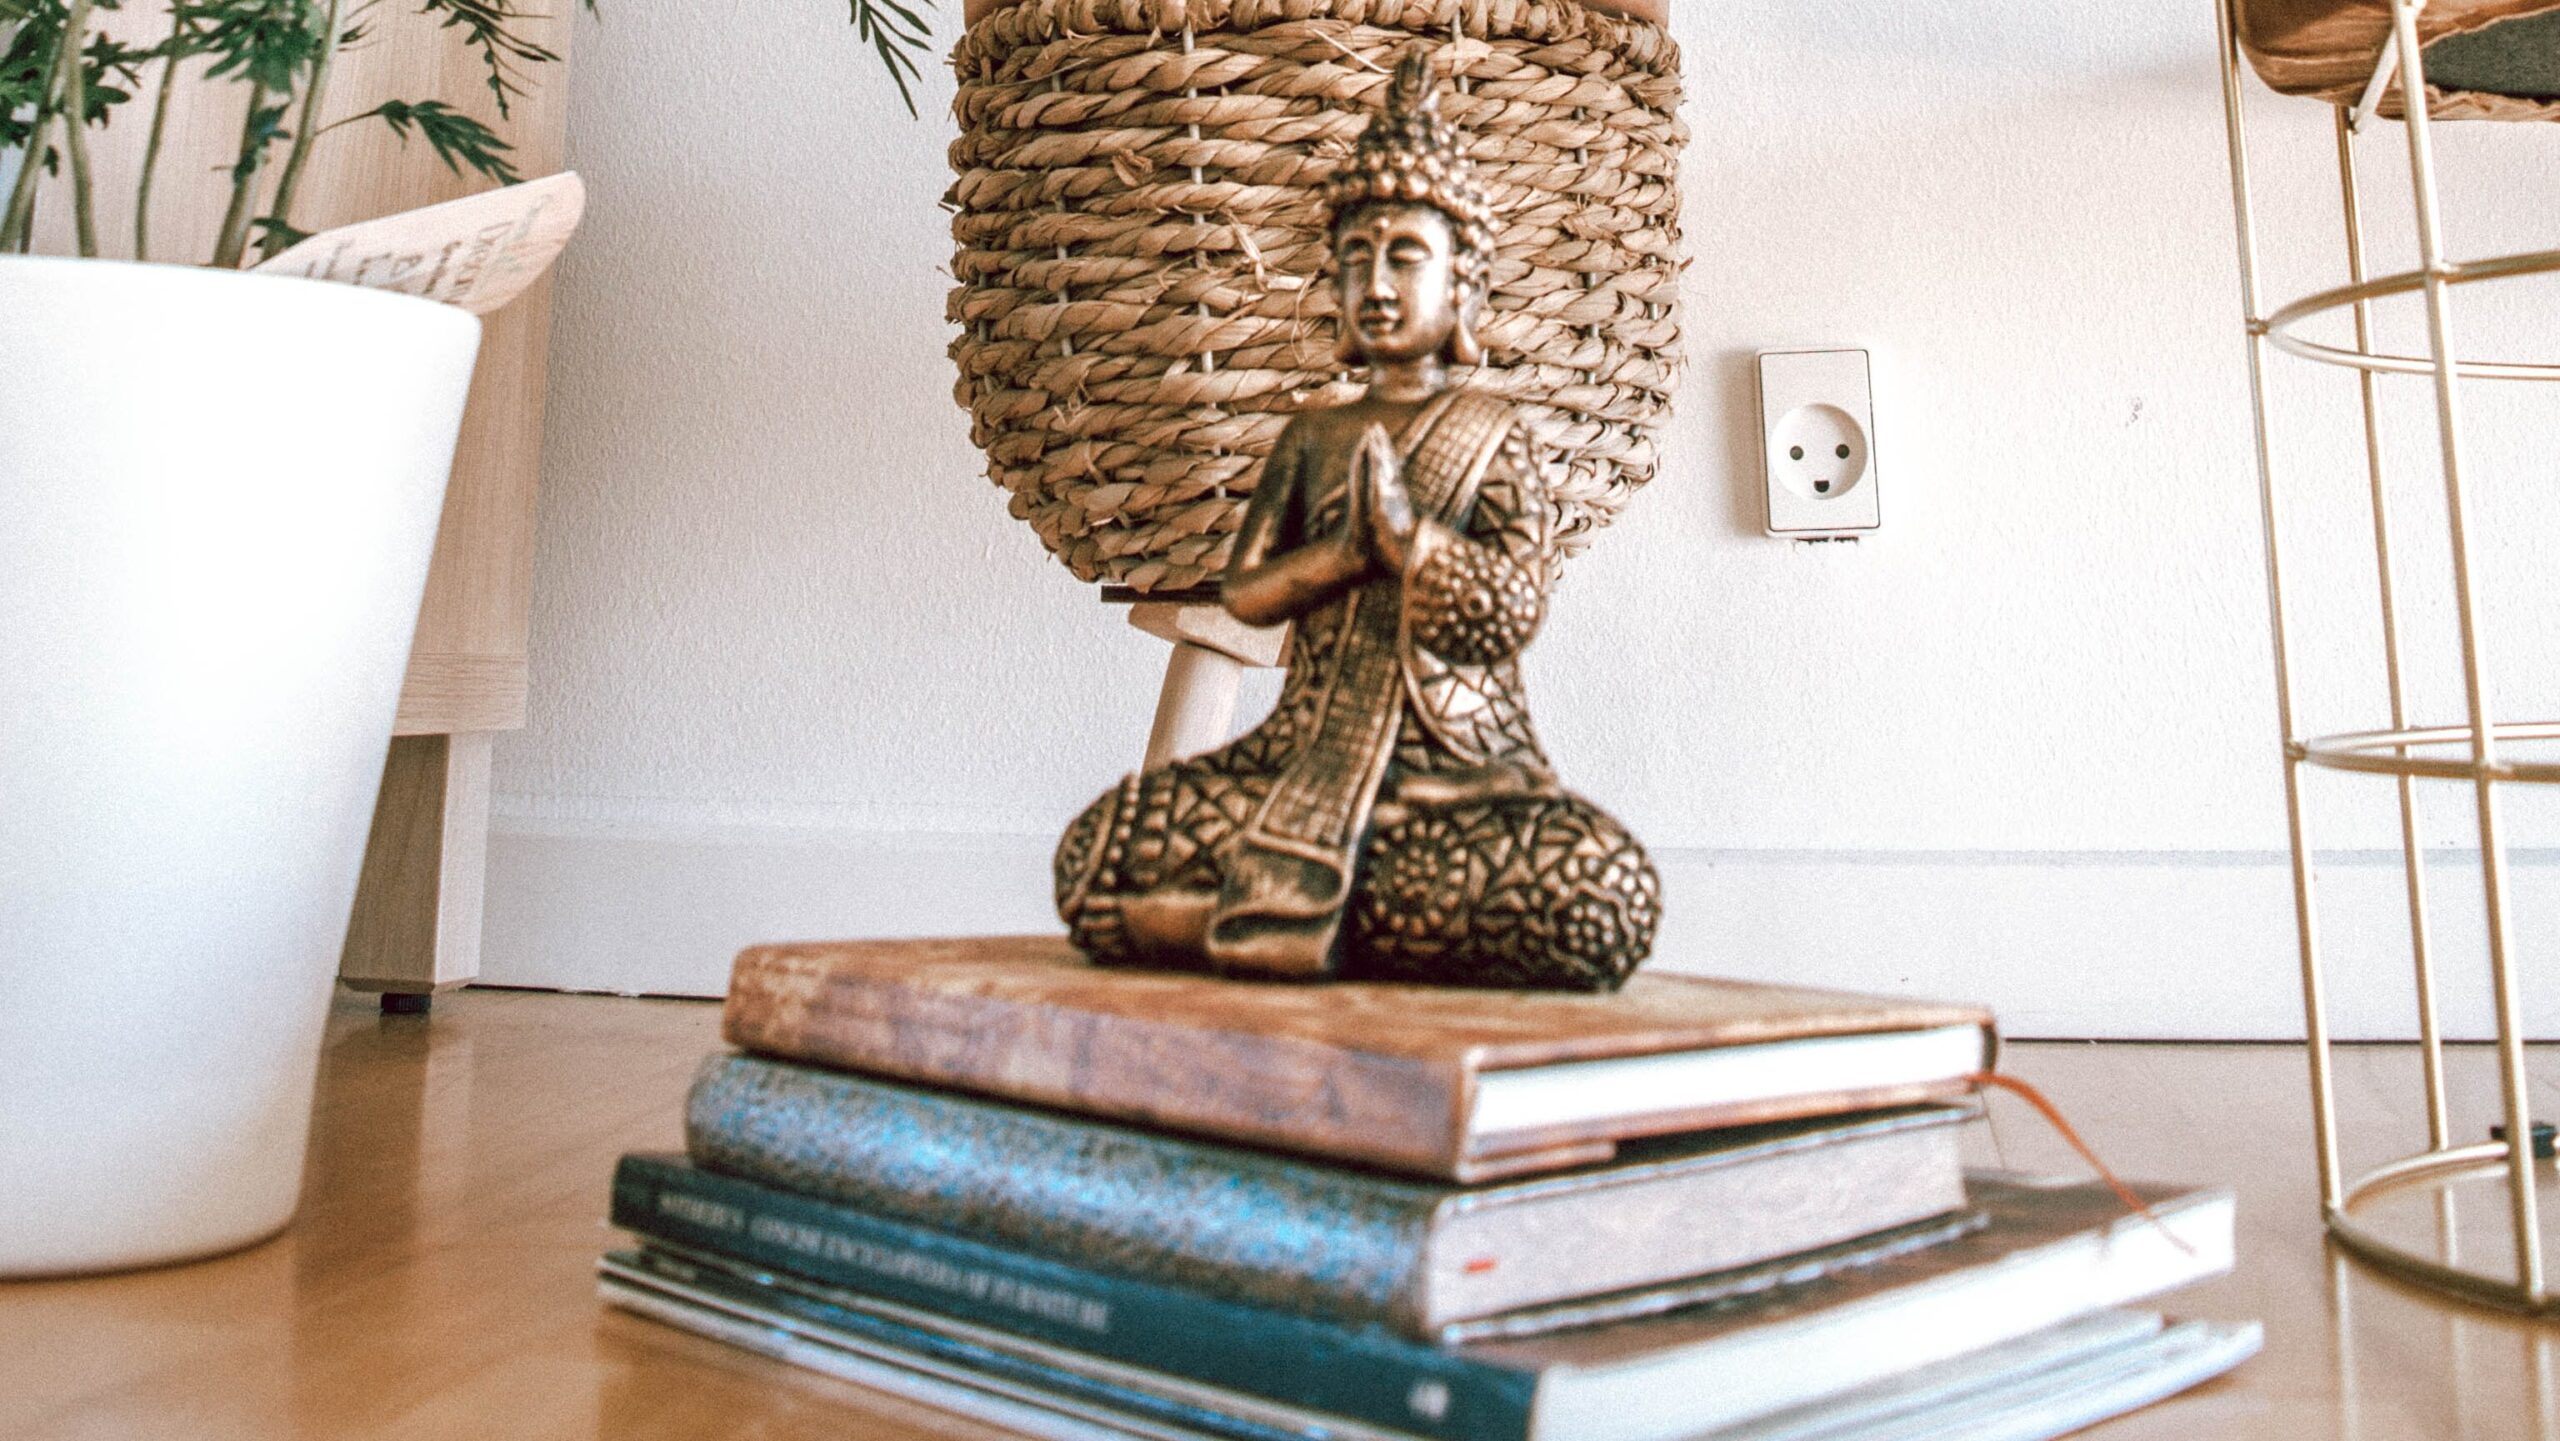 Yoga Books stacked on floor by statue and plants